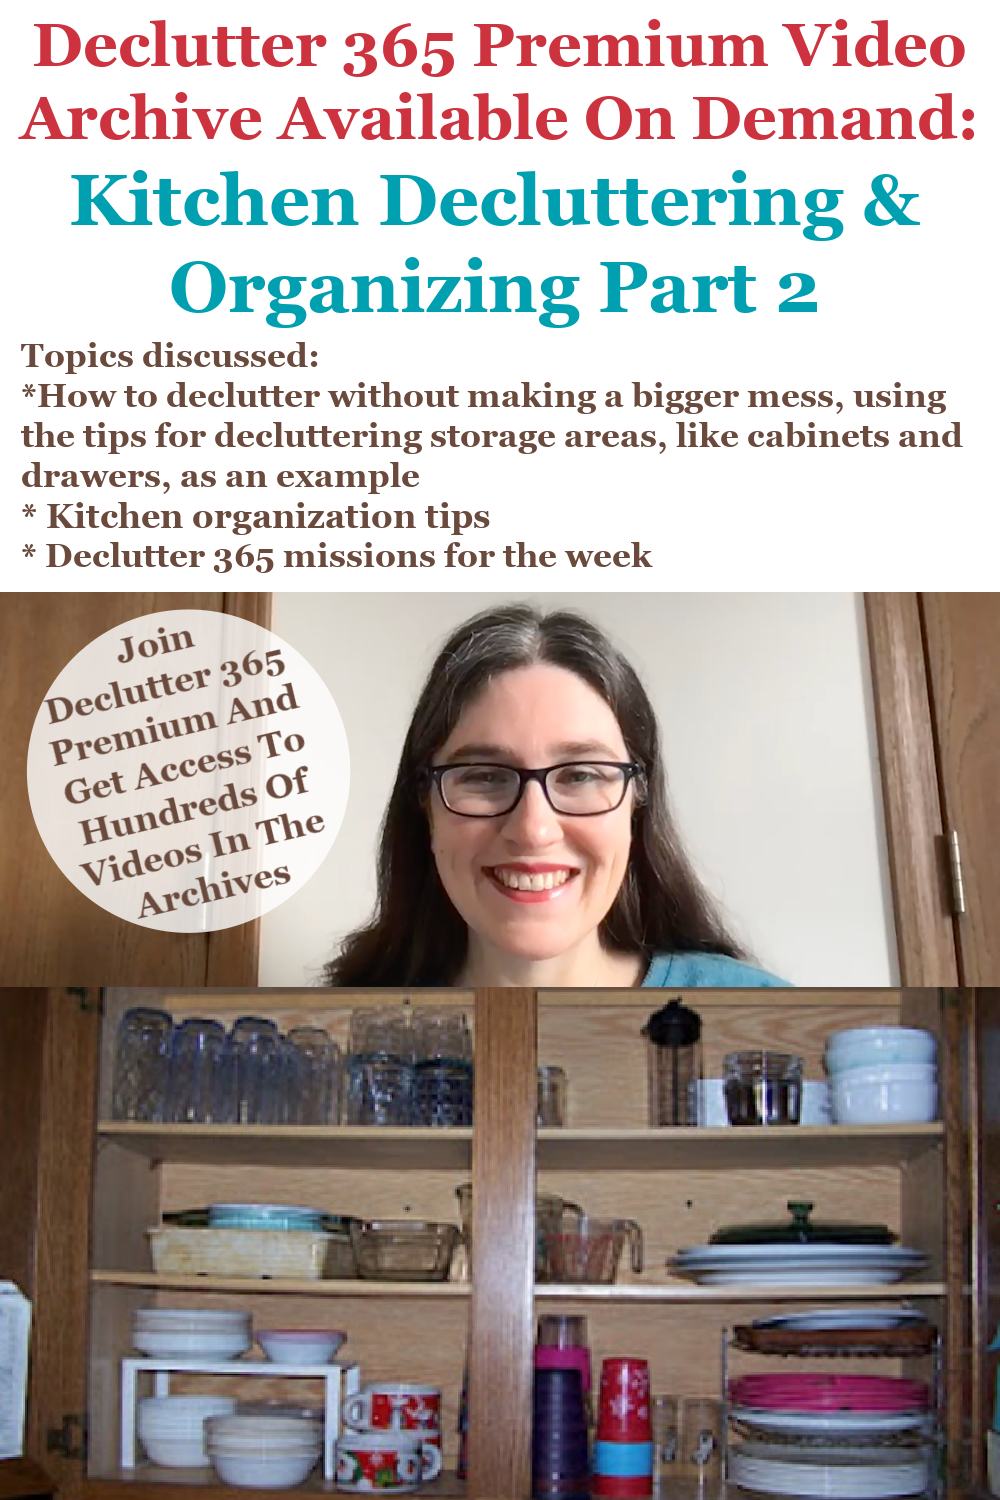 How We Organized All Our Drawers & Cabinets in the Mountain House